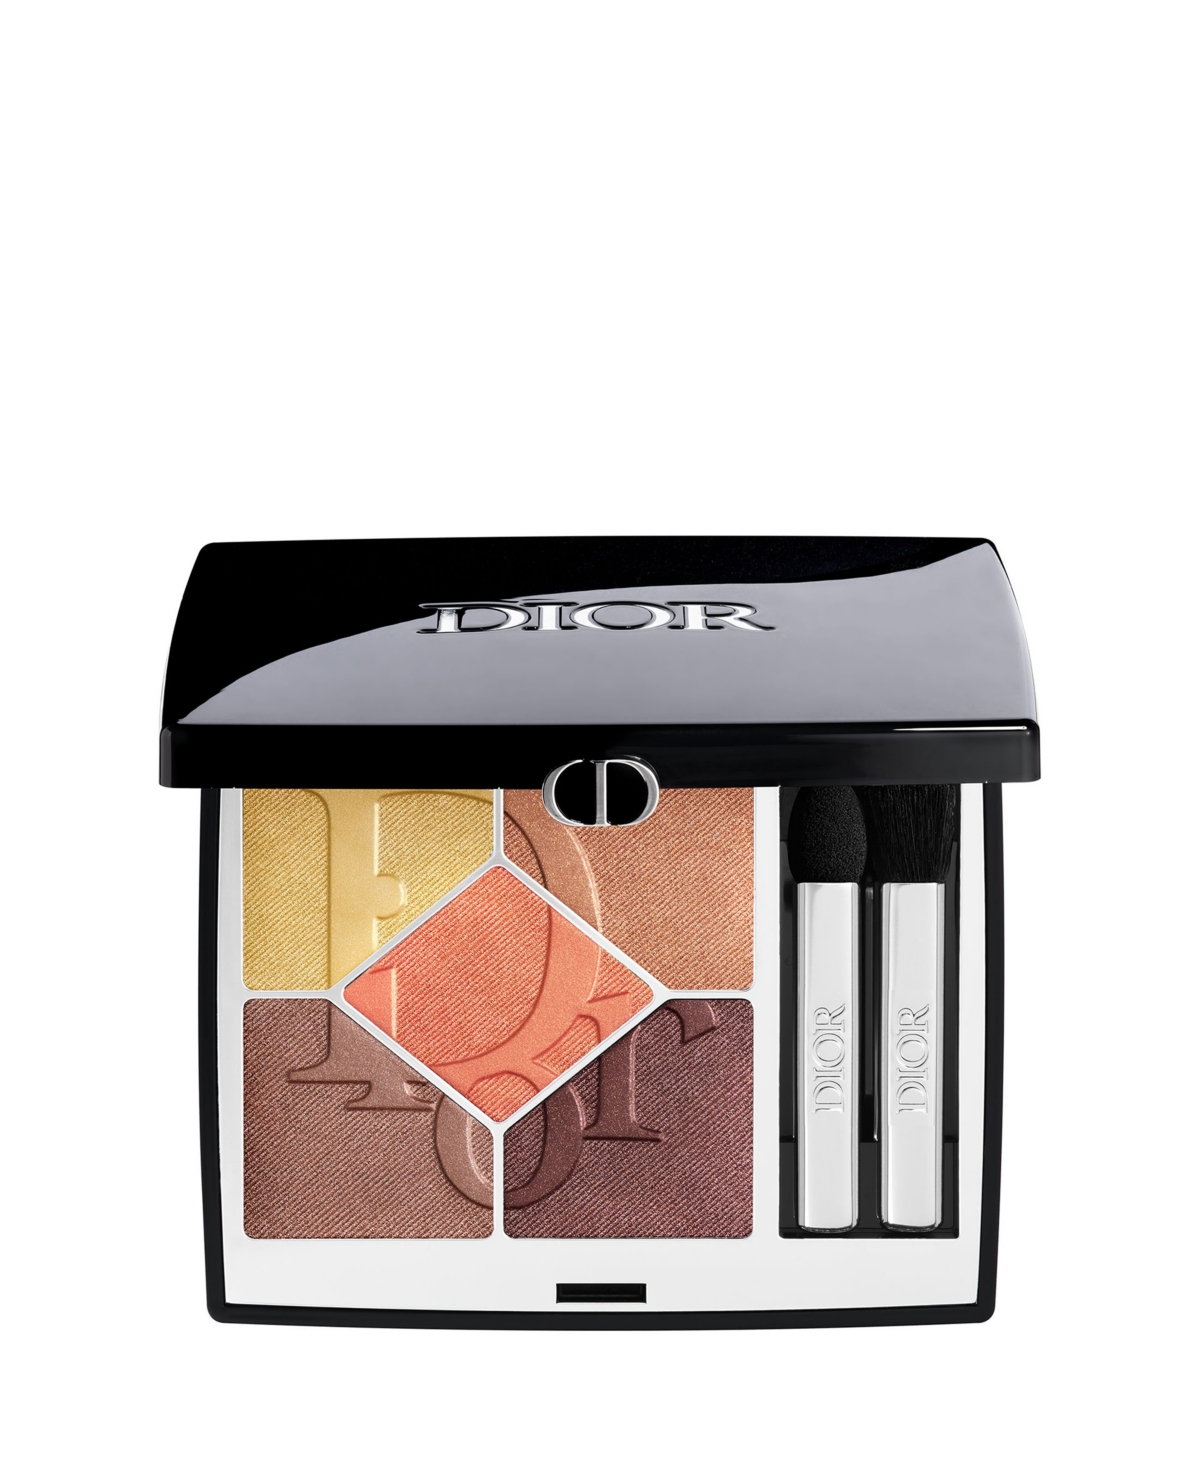 Limited-Edition Diorshow 5 Couleurs Eyeshadow Palette - Pastel Glow